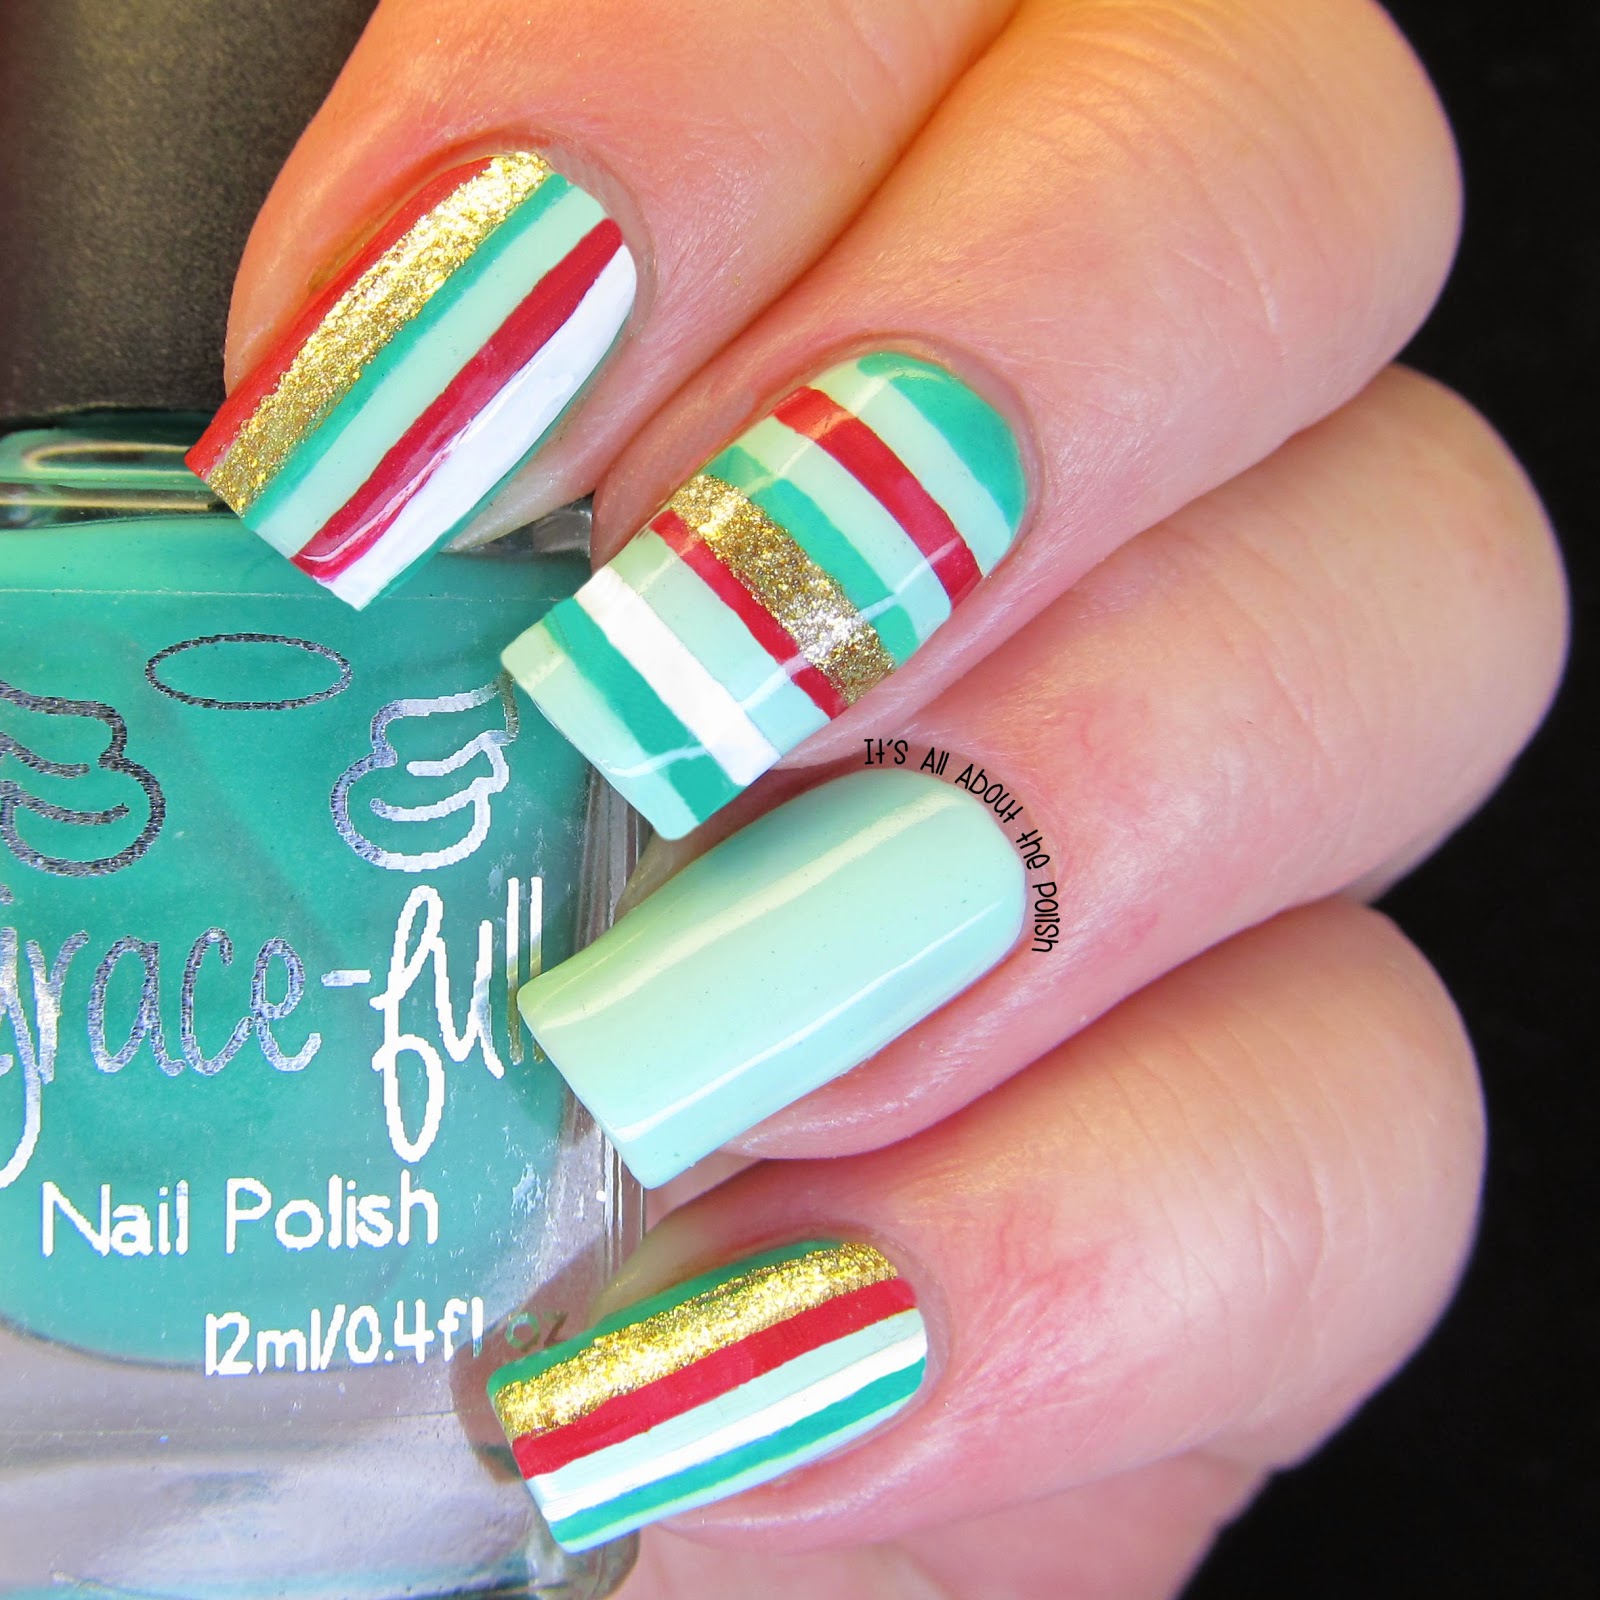 It's all about the polish: Christmas Stripes Nail Art